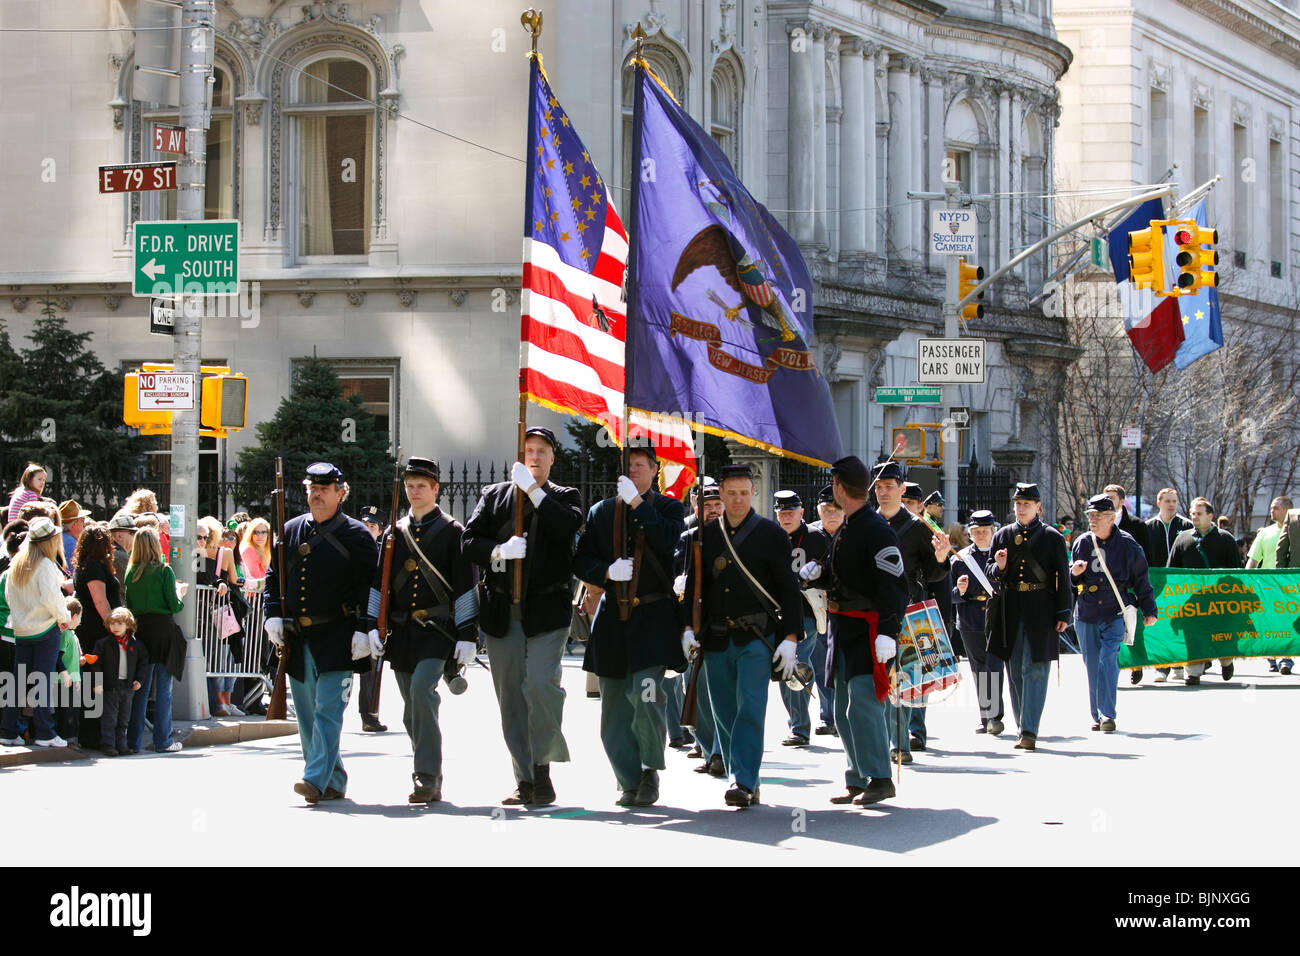 Union soldiers of the Civil War reenactment brigade march up New York City's 5th Ave. in the annual St. Patrick's Day parade Stock Photo